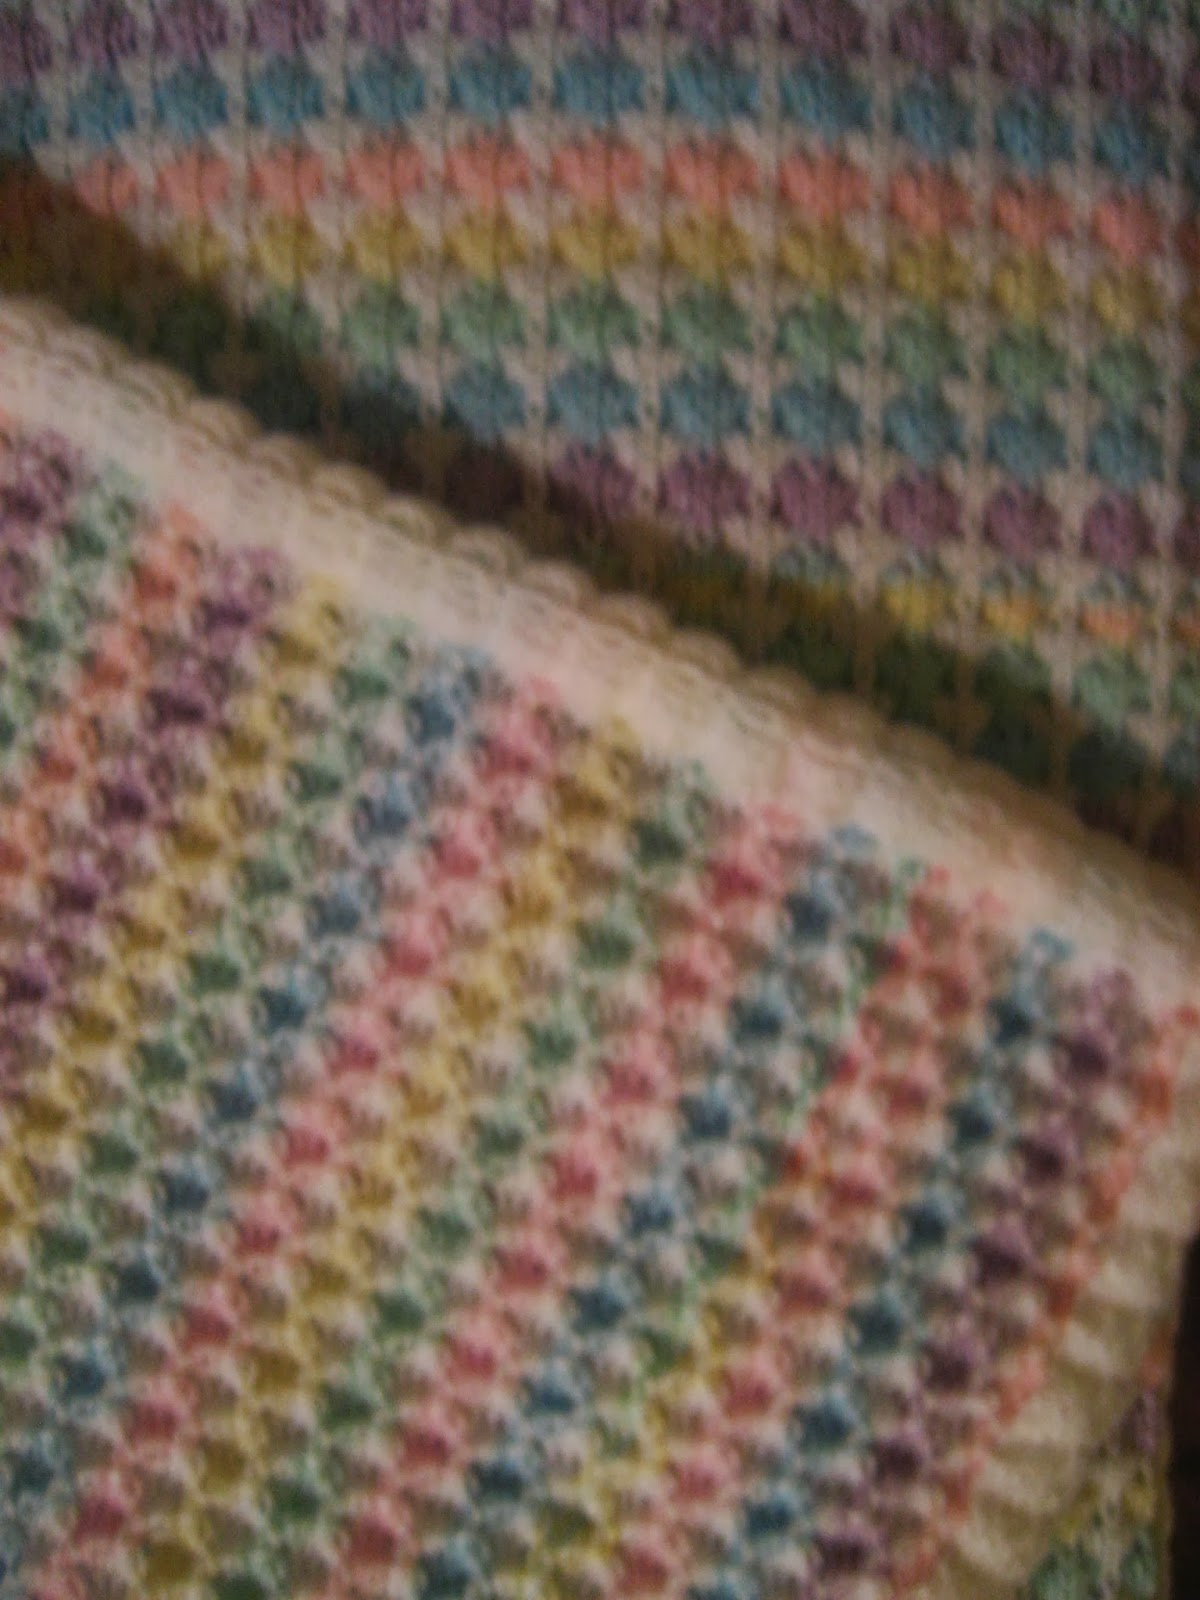 Machine Knit Baby Blanket Pattern Diana Natters On About Machine Knitting Another Ba Blanket